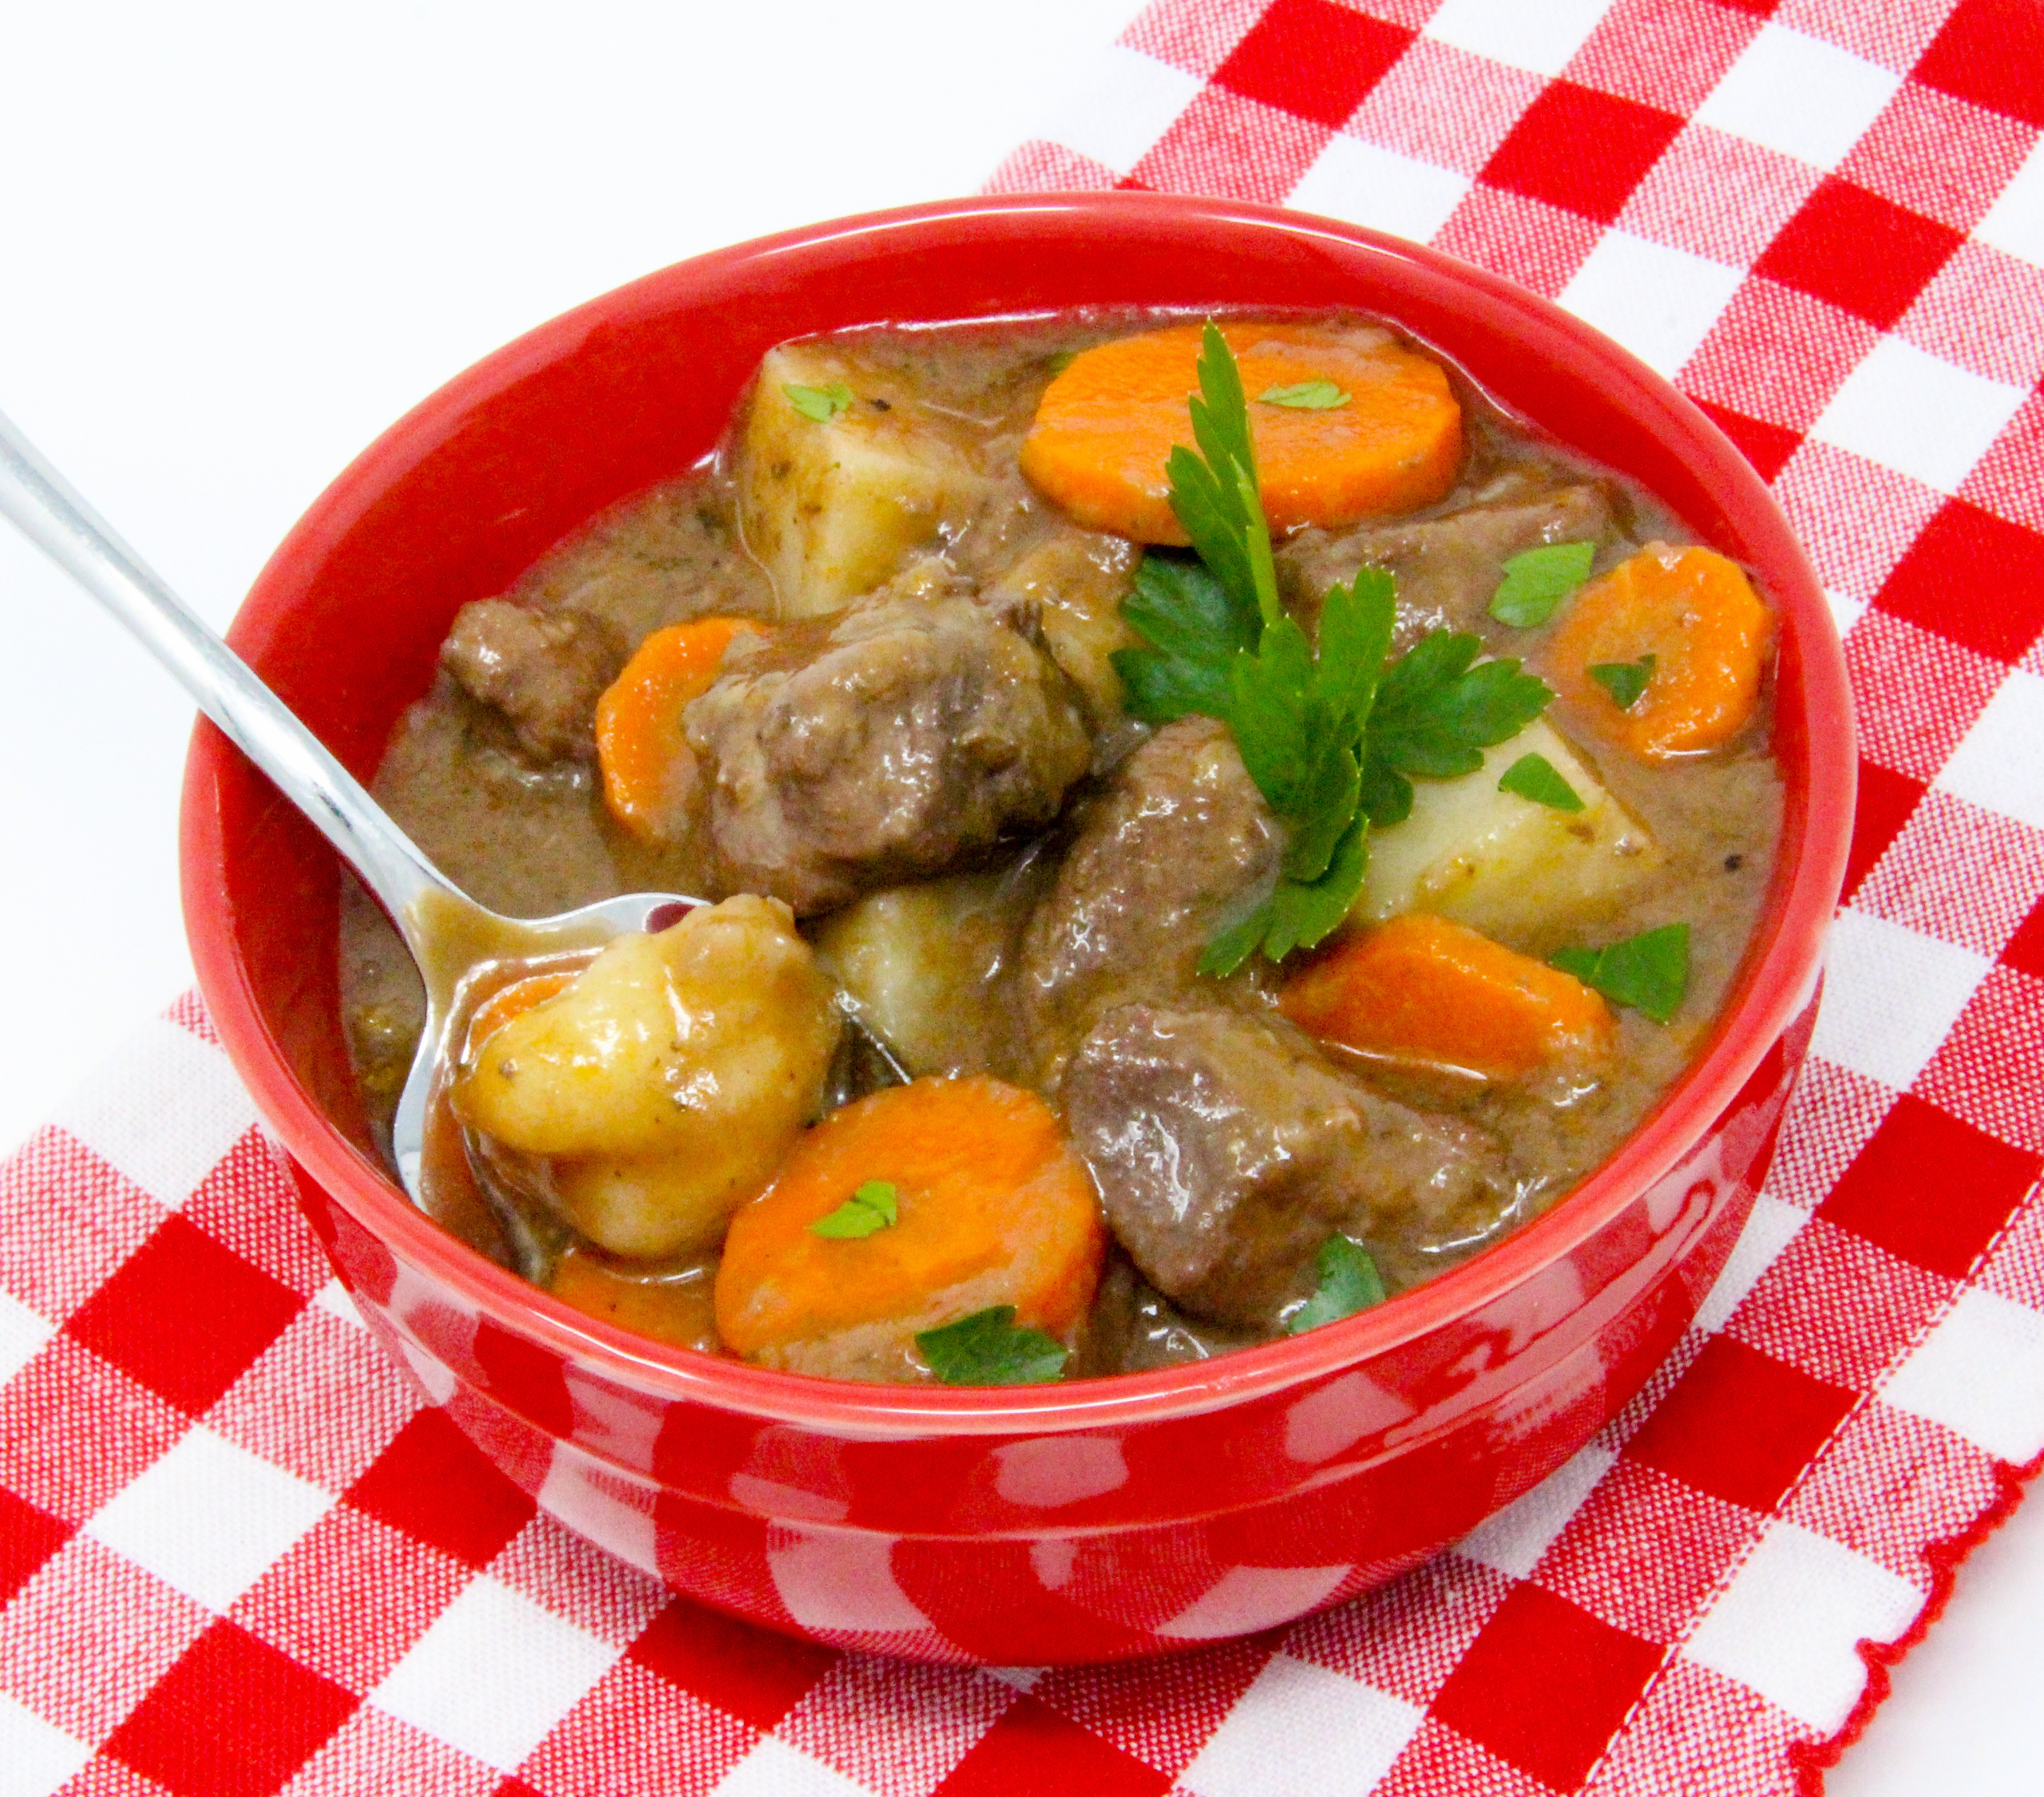 Eoin's Irish Stew is a hearty dish and chock full of flavor. This warming bowl of stew is the perfect dinner for a chilly night or a simple reheat for a filling lunch the next day! Recipe shared with permission granted by Carlene O'Connor, author of MURDER IN AN IRISH BOOKSHOP. 